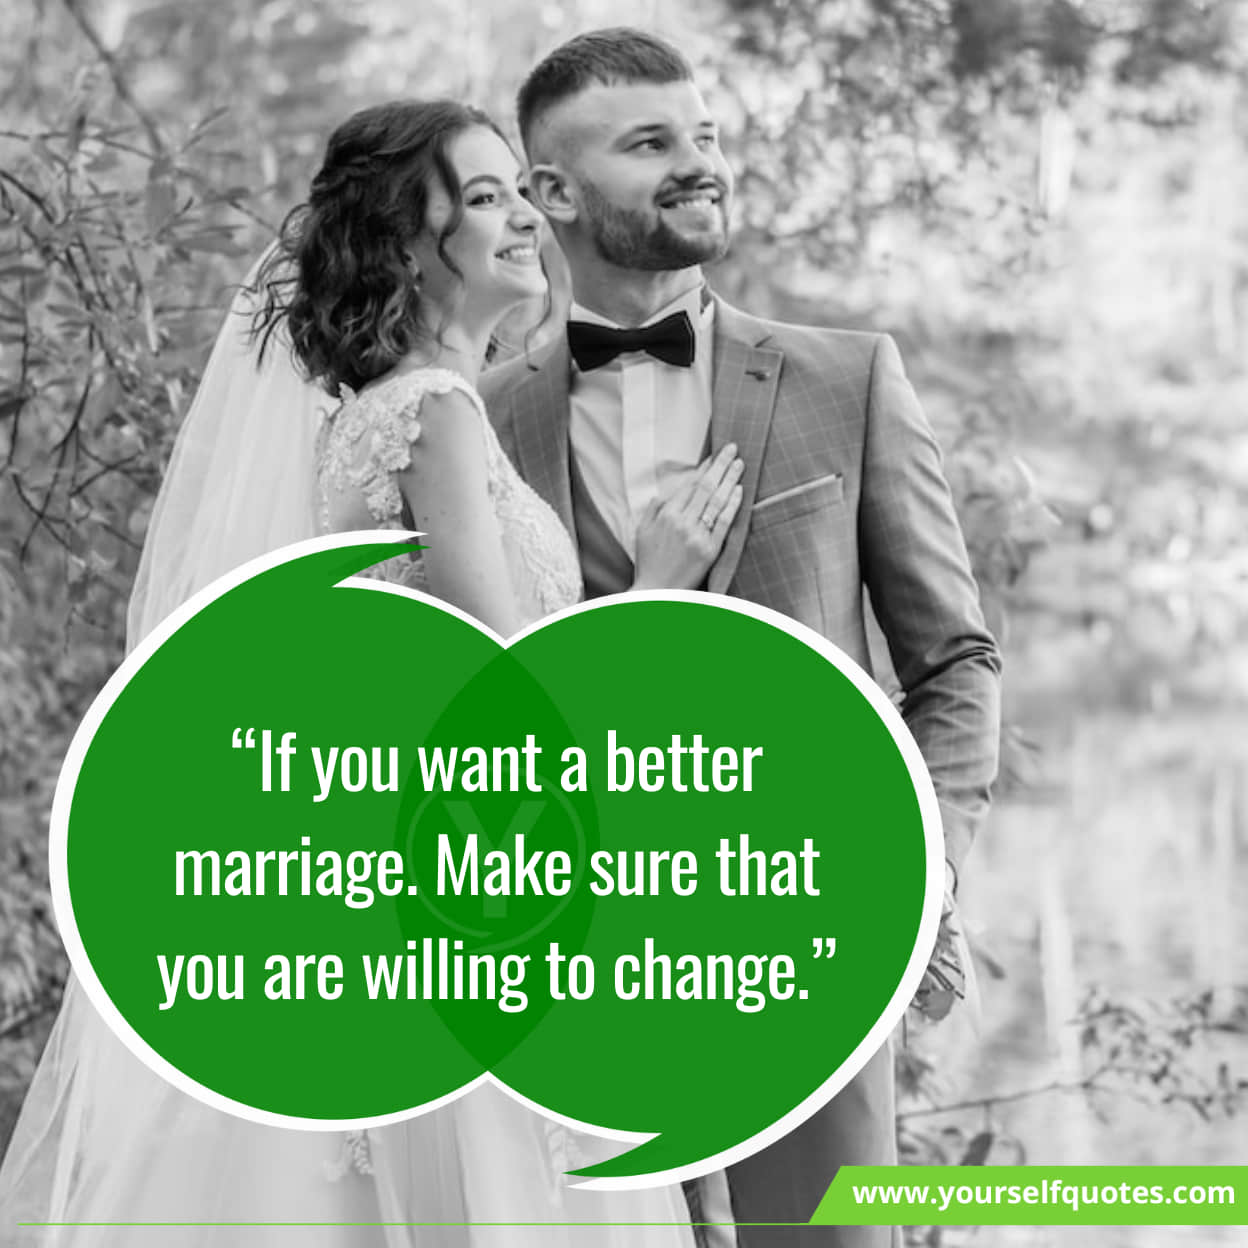 Happy Marriage Quotes To Celebrate